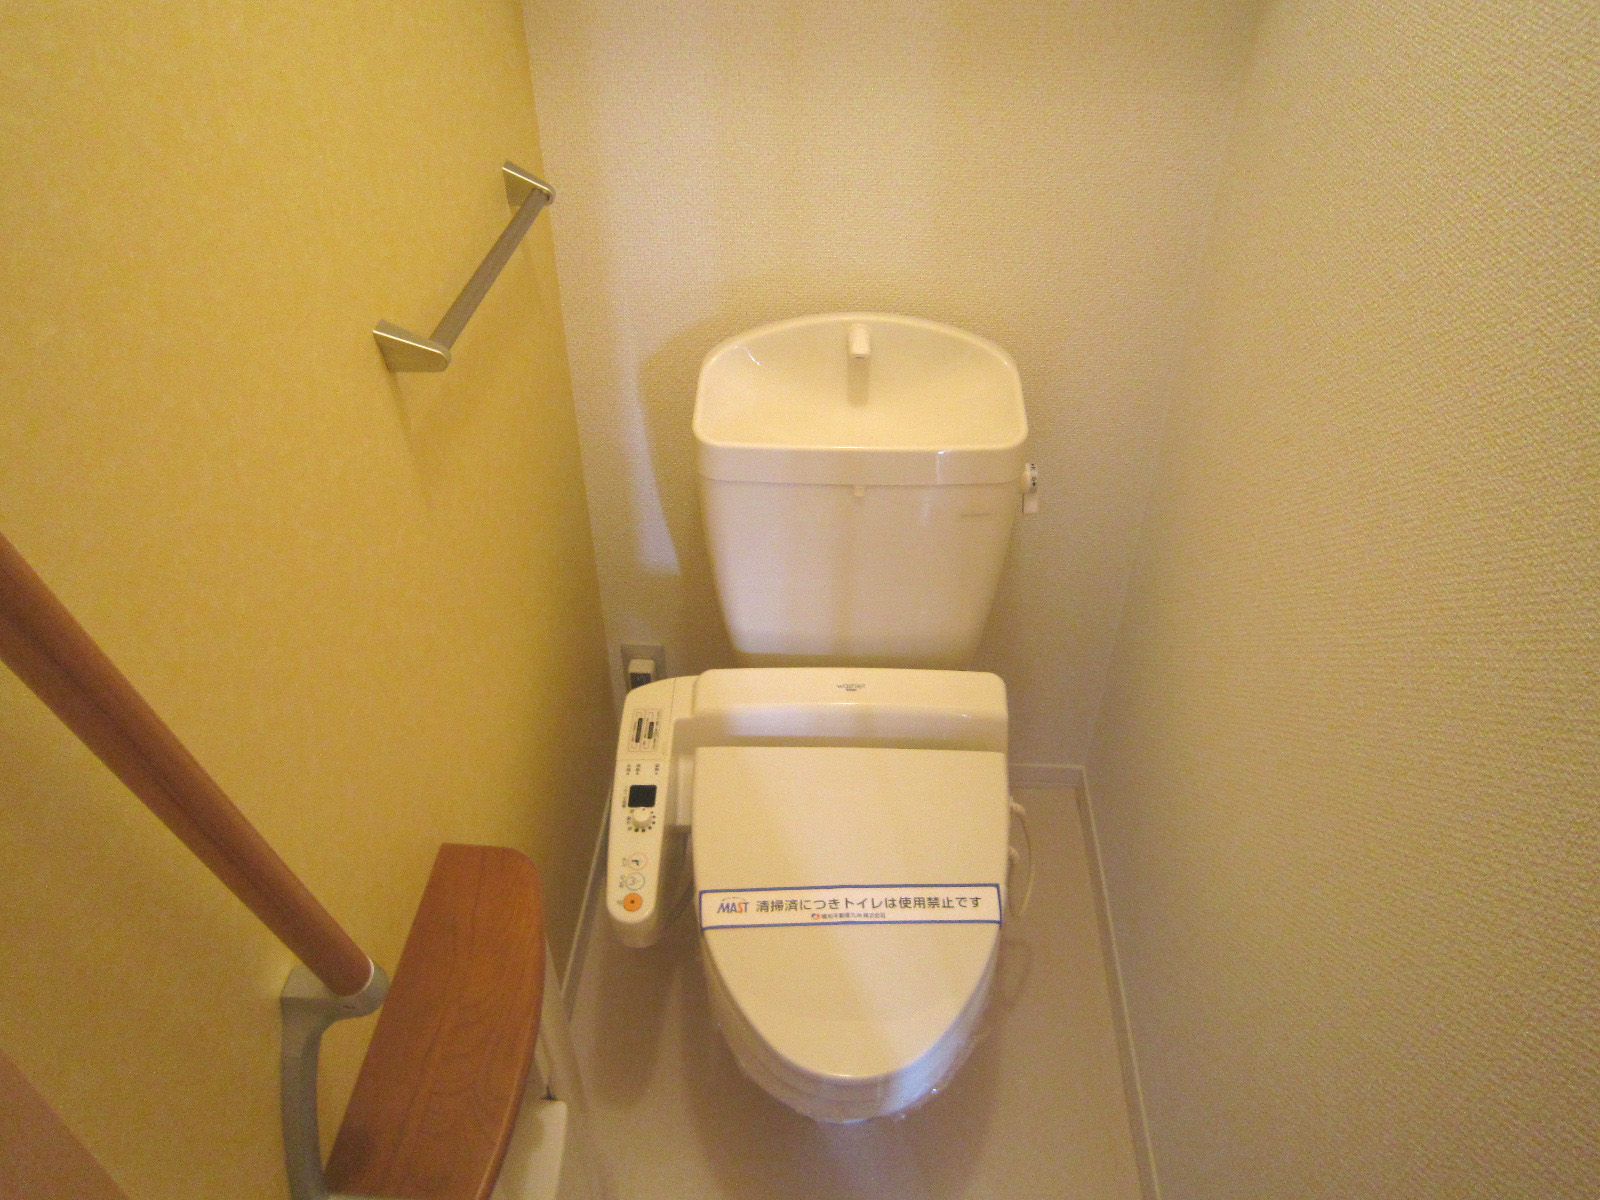 Toilet. Or winter also had toilet seat with warm water cleaning toilet seat (* ^ _ ^ *)